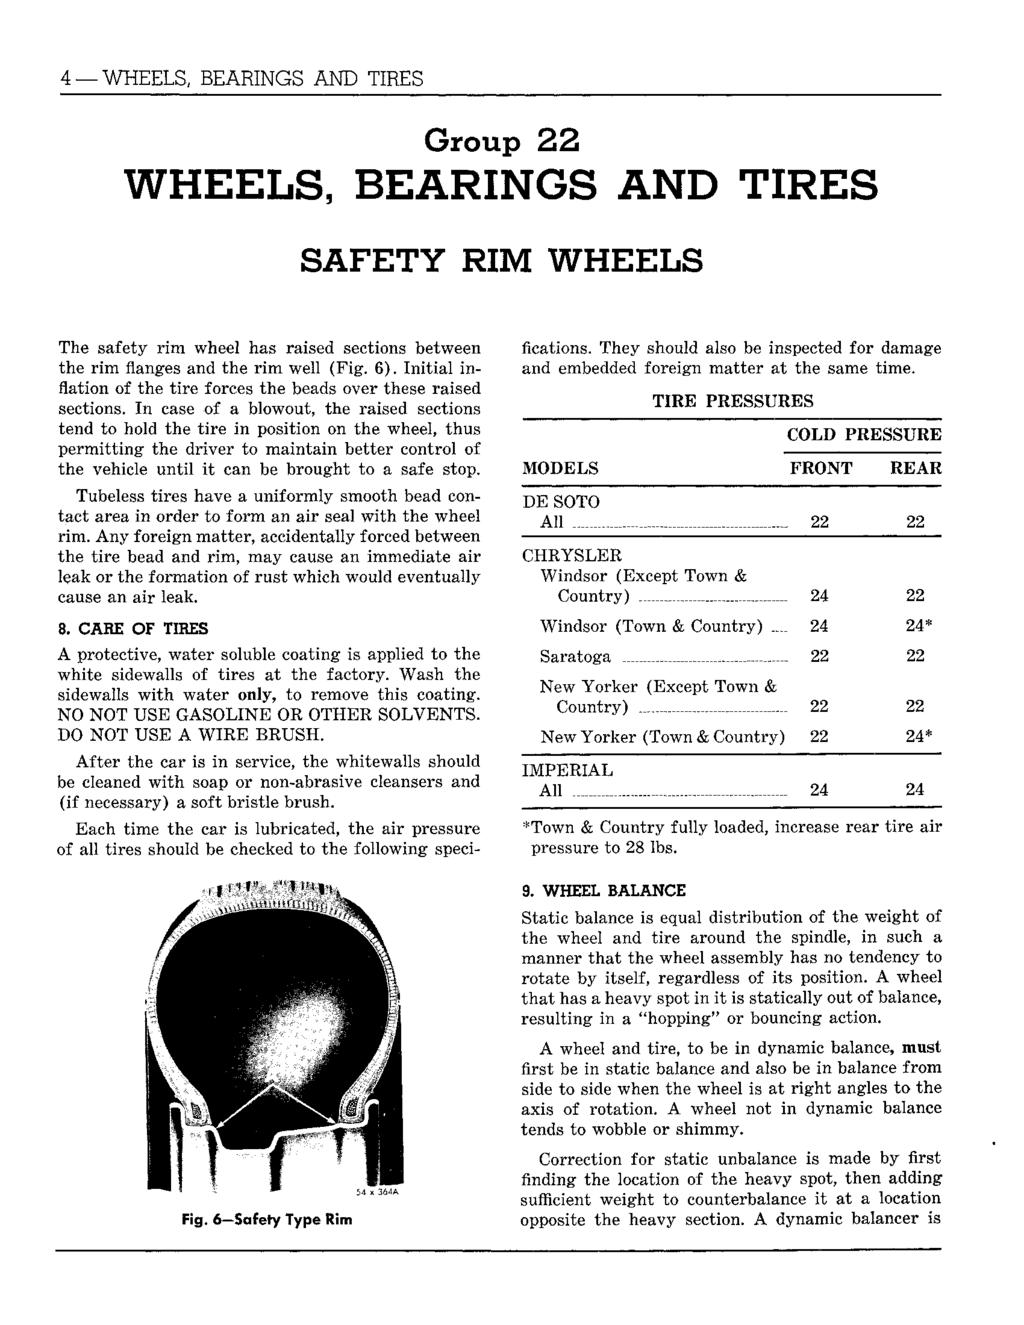 4 WHEELS, BEARINGS AND TIRES Group 22 WHEELS, BEARINGS AND TIRES SAFETY RIM WHEELS The safety rim wheel has raised sections between the rim flanges and the rim well (Fig. 6).